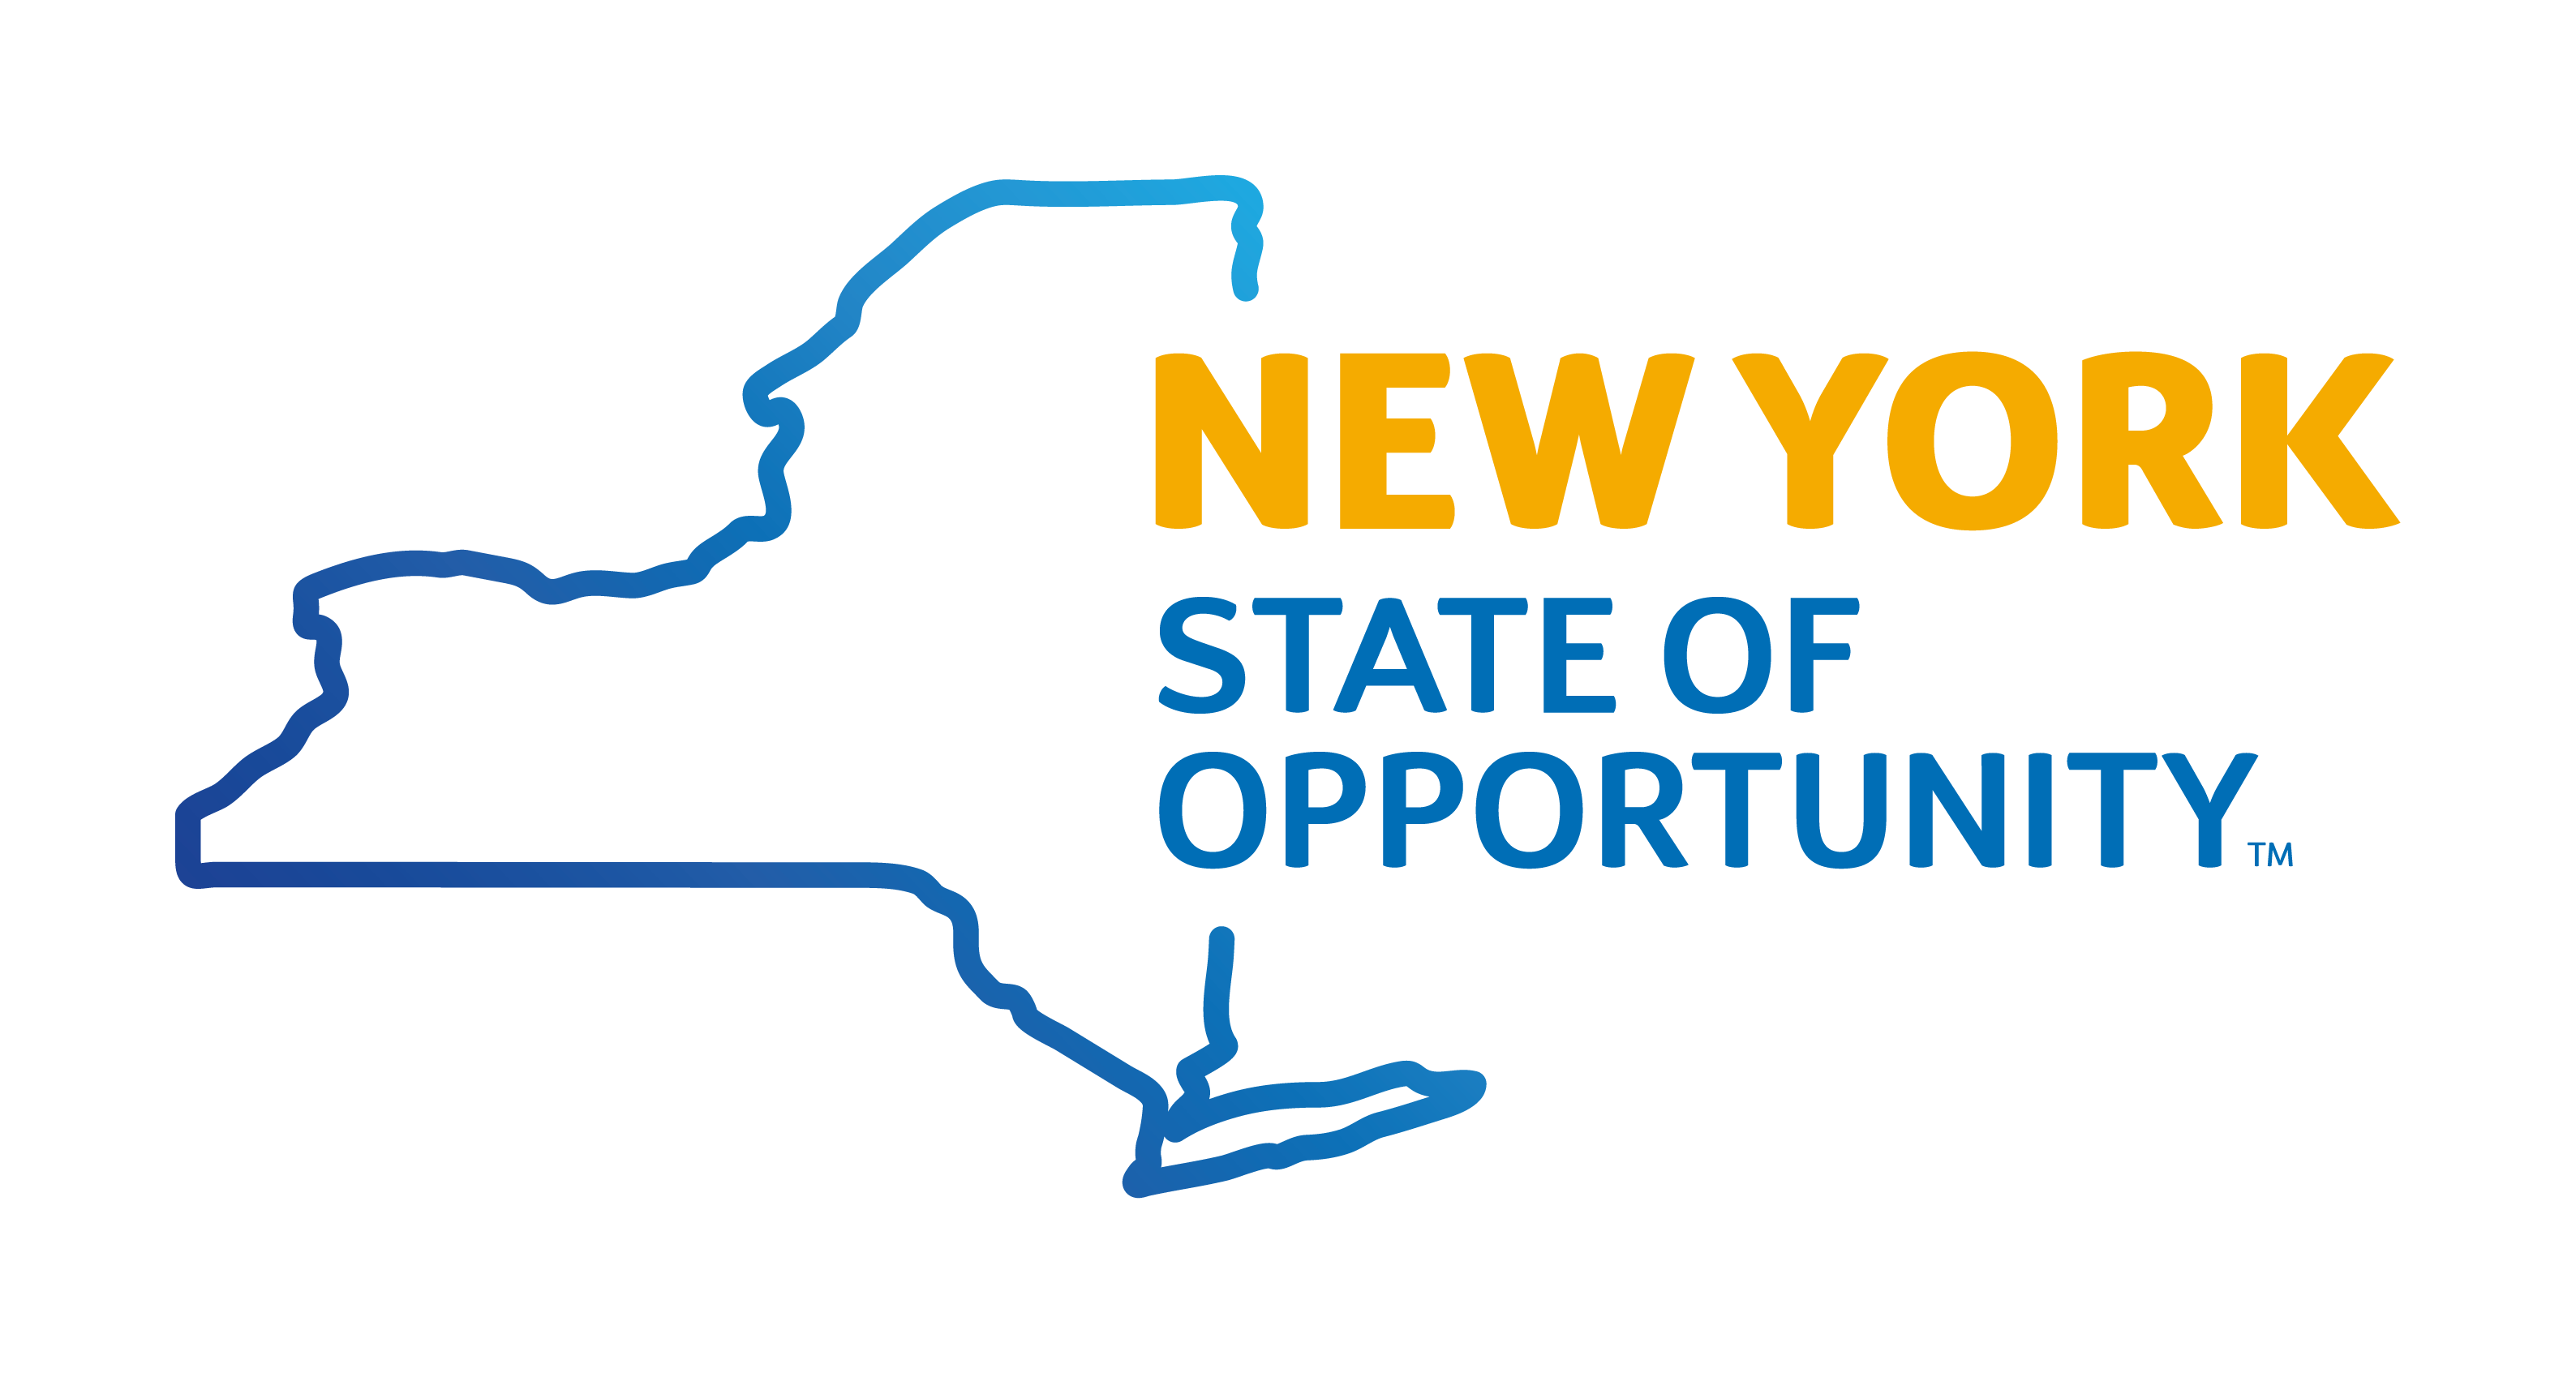 New York State of Opportunity full color client logo